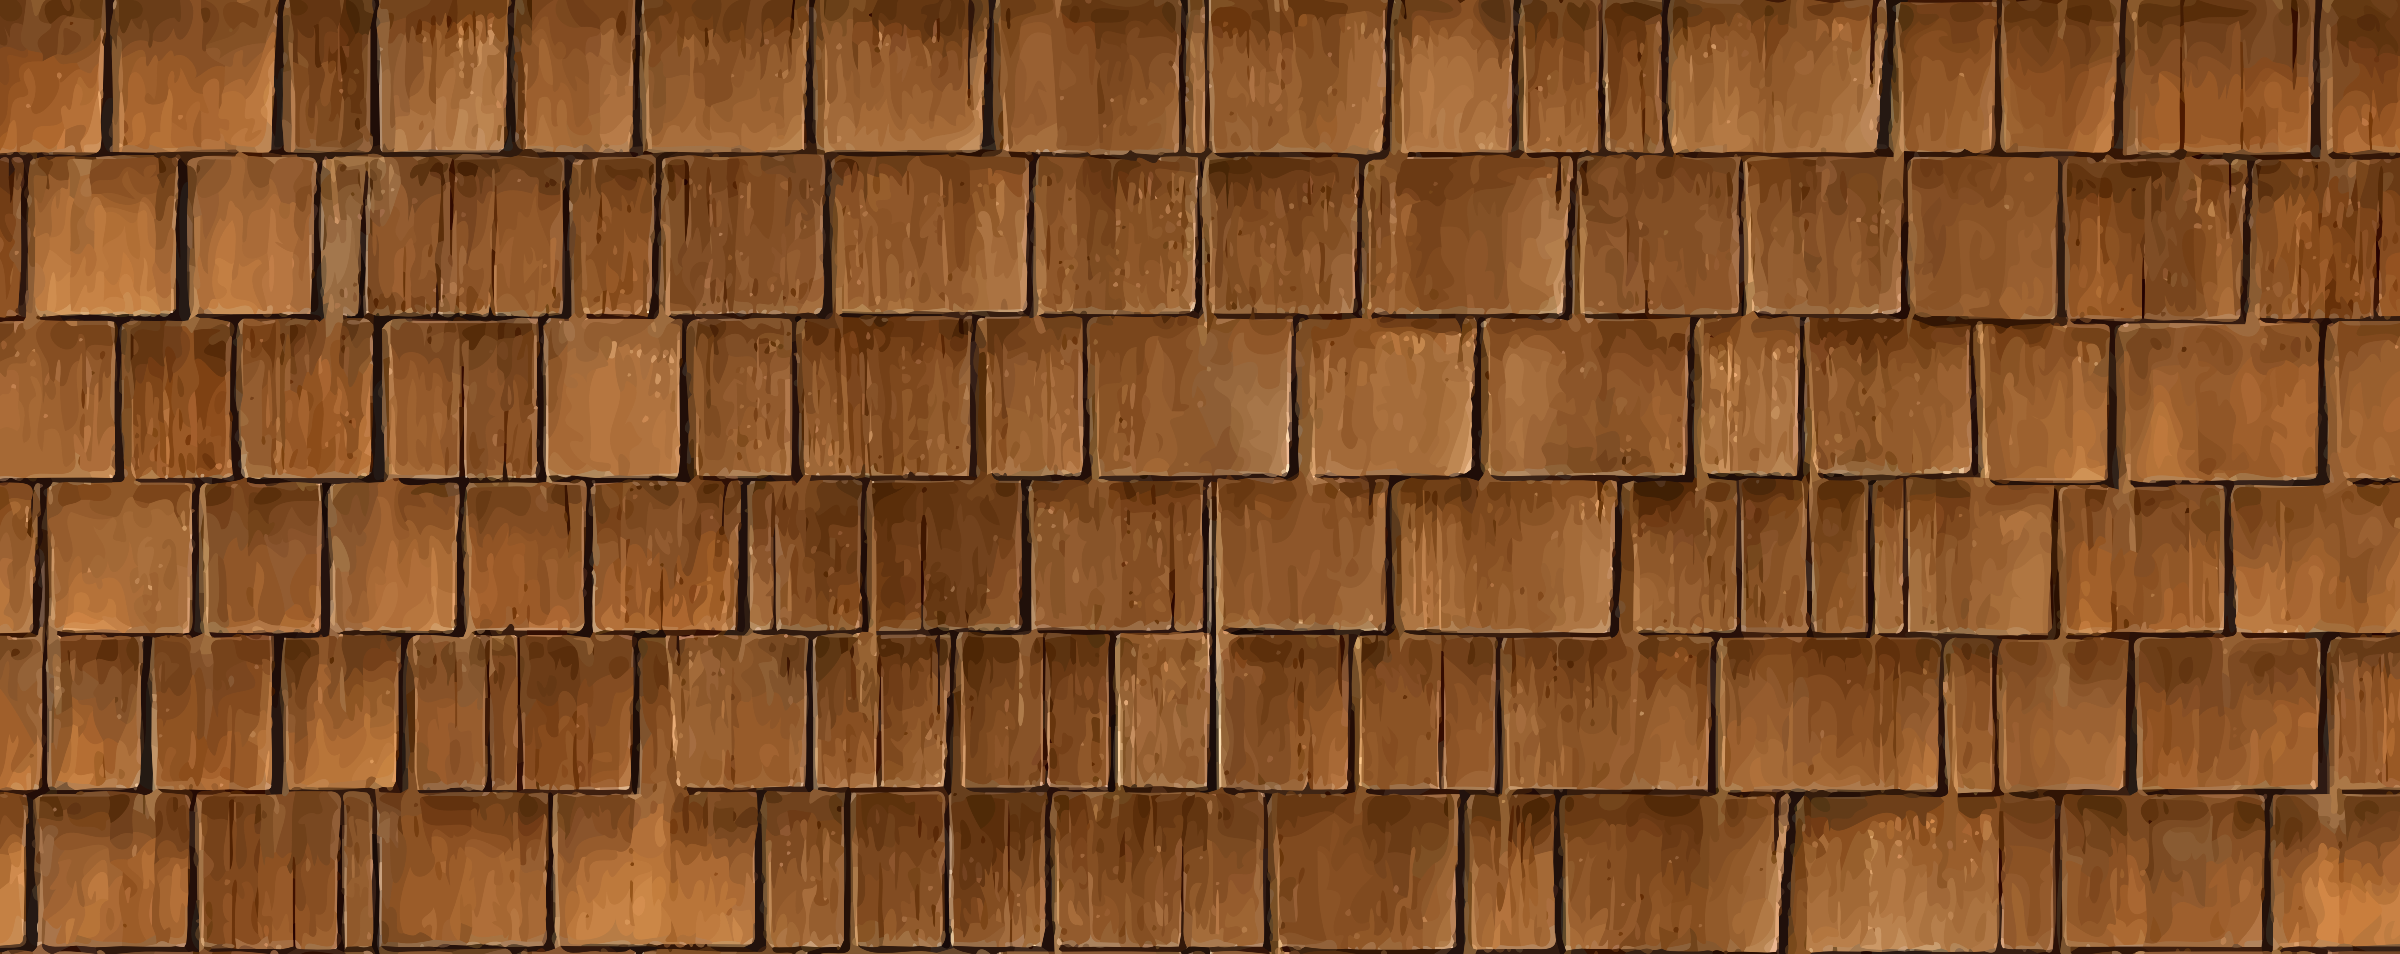 Clipart - Roof shingles